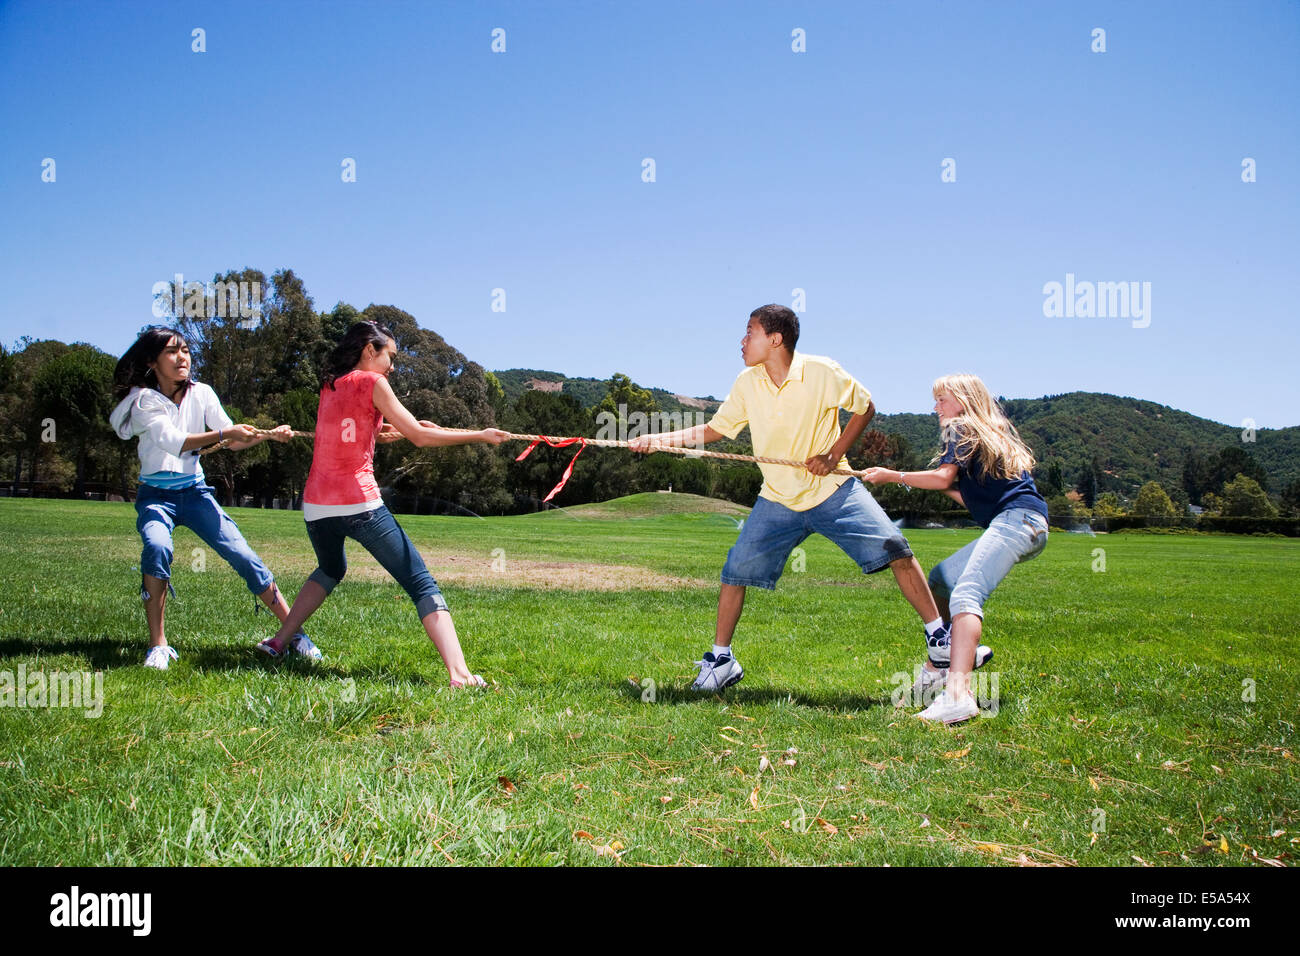 Children playing tug-of-war in field Stock Photo